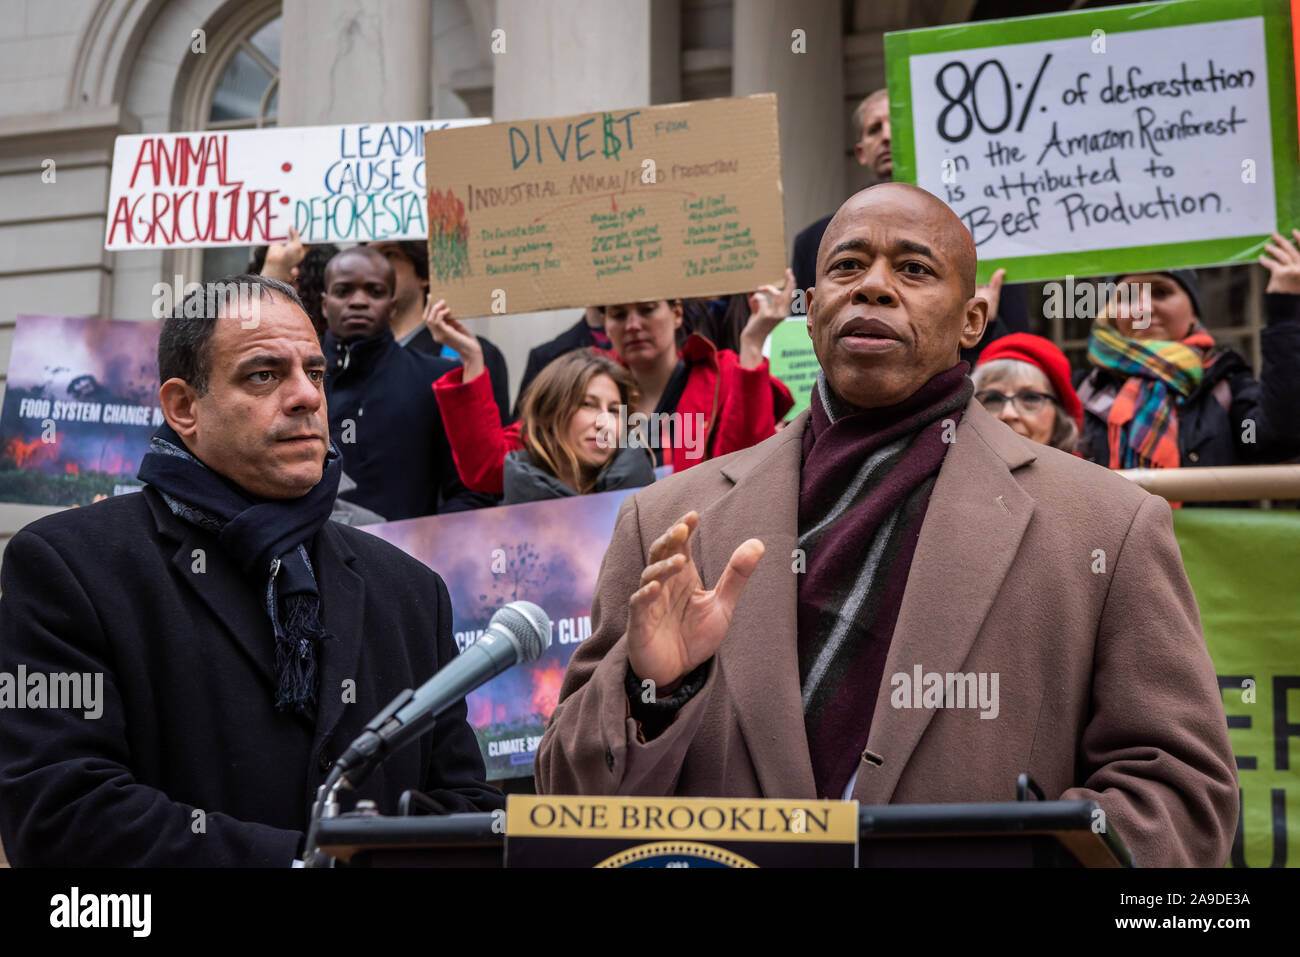 New York, USA. 14th Nov, 2019. (L-R) New York City Council Member Costa Constantinides and Eric Adams announce a resolution calling for ban on business with companies tied to the Amazon Wildfires on the steps of New York City Hall on November 14, 2019. An annual 5% increased demand for beef has prompted South American ranchers to burn swaths of the historic rainforest, an asset in the fight against climate change, which have gone out of control. (Photo by Gabriele Holtermann-Gorden/Pacific Press) Credit: Pacific Press Agency/Alamy Live News Stock Photo